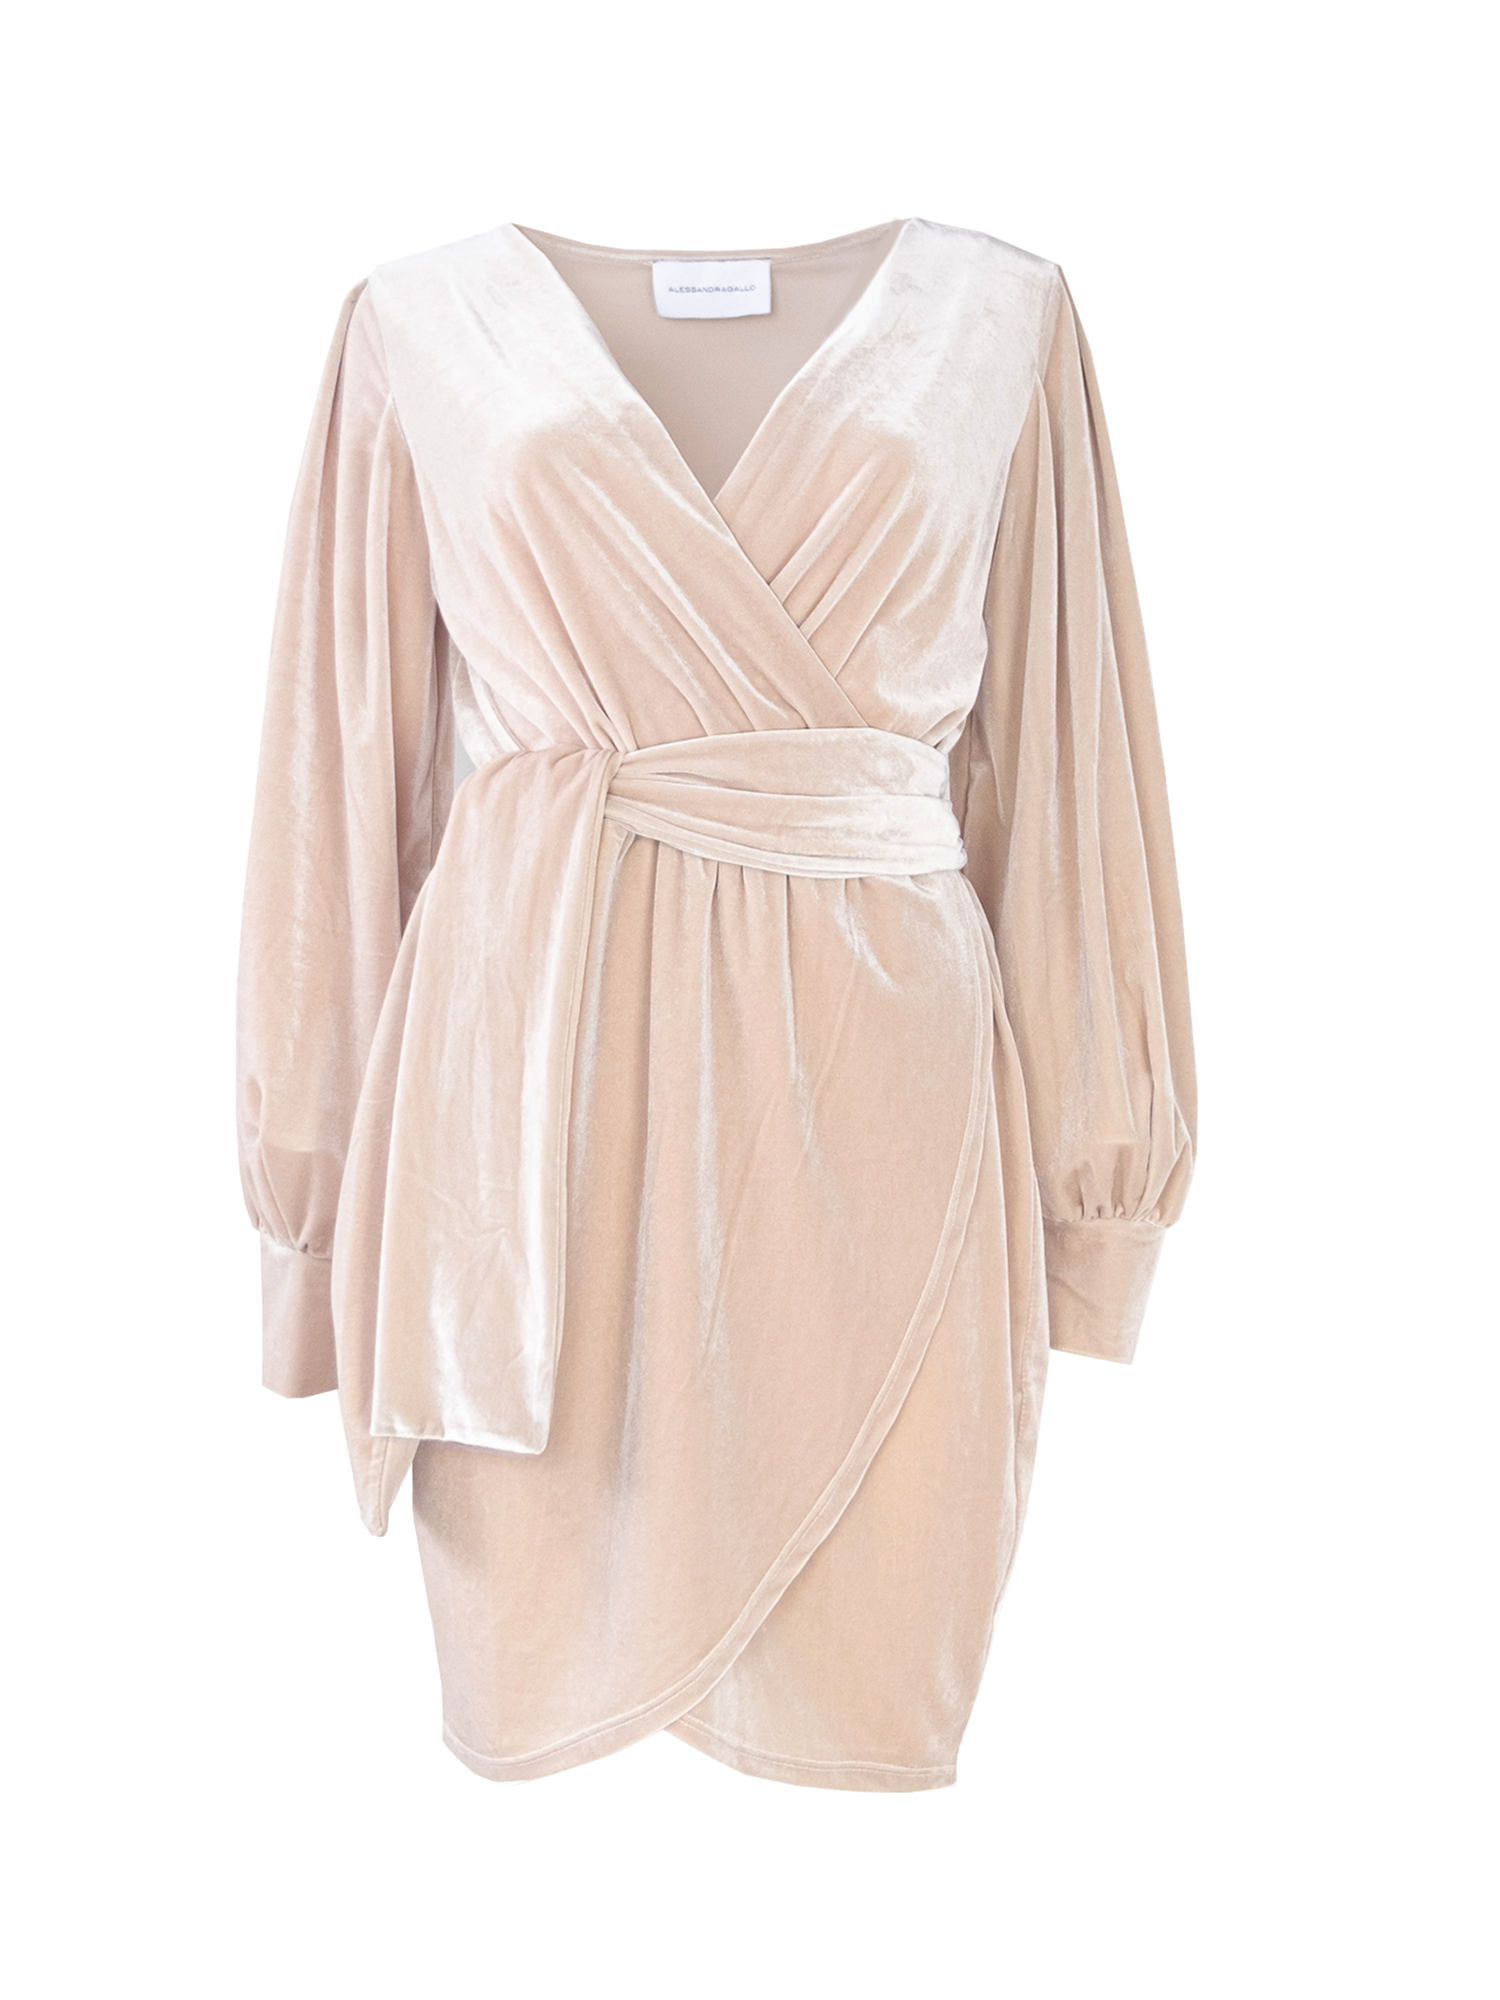 OFELIA - short dress with wide sleeve and sash in beige chenille